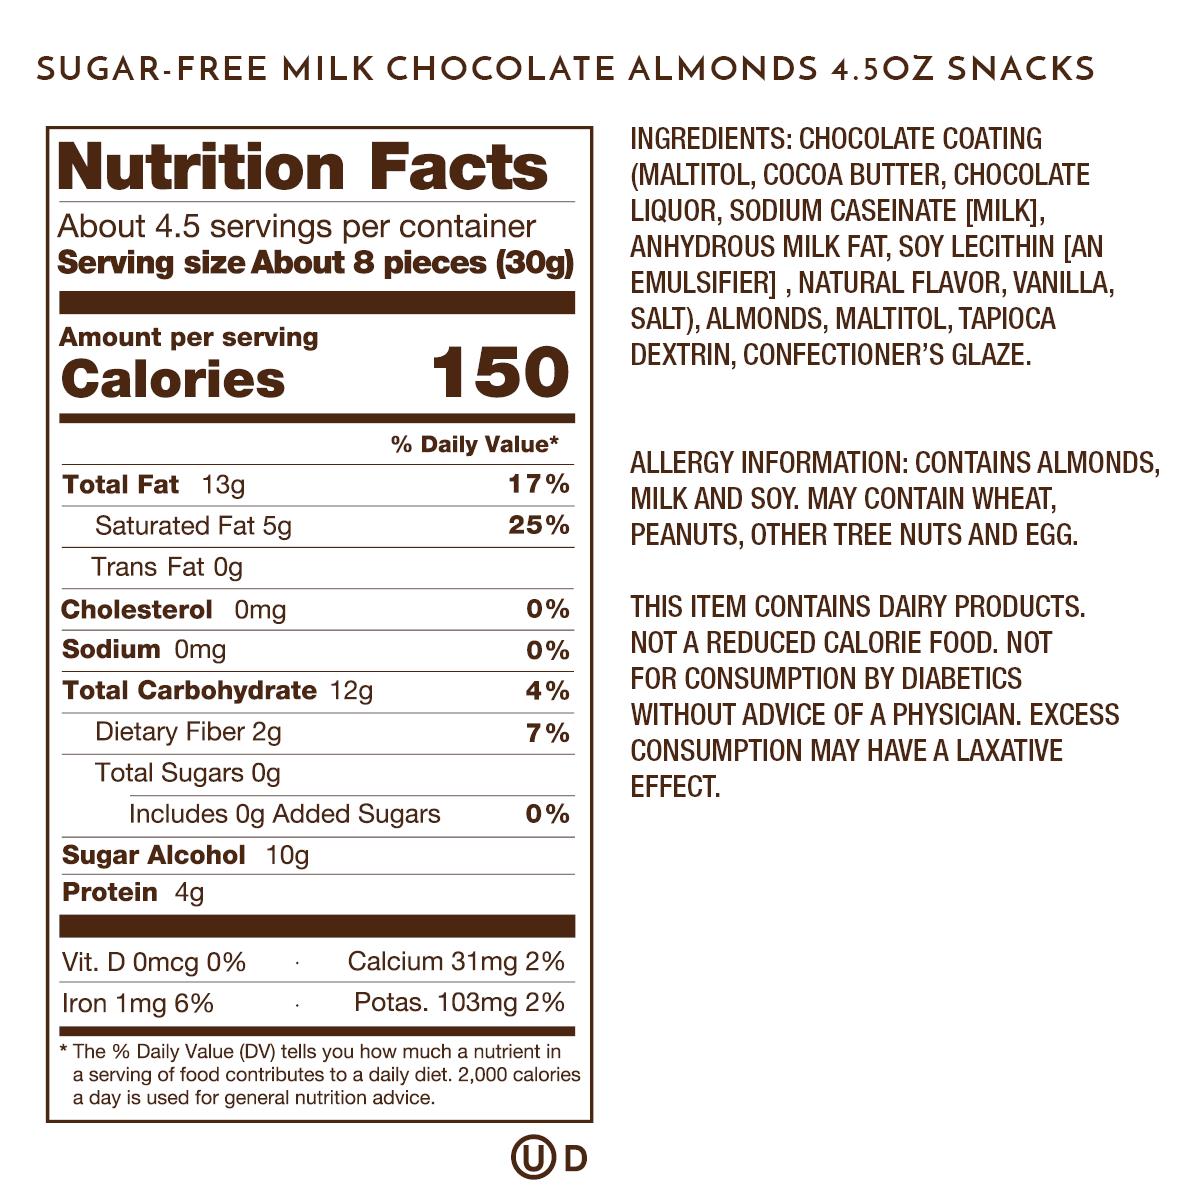 Nutrition Facts, Allergy and Ingredients on our Sugar Free Panned Item.